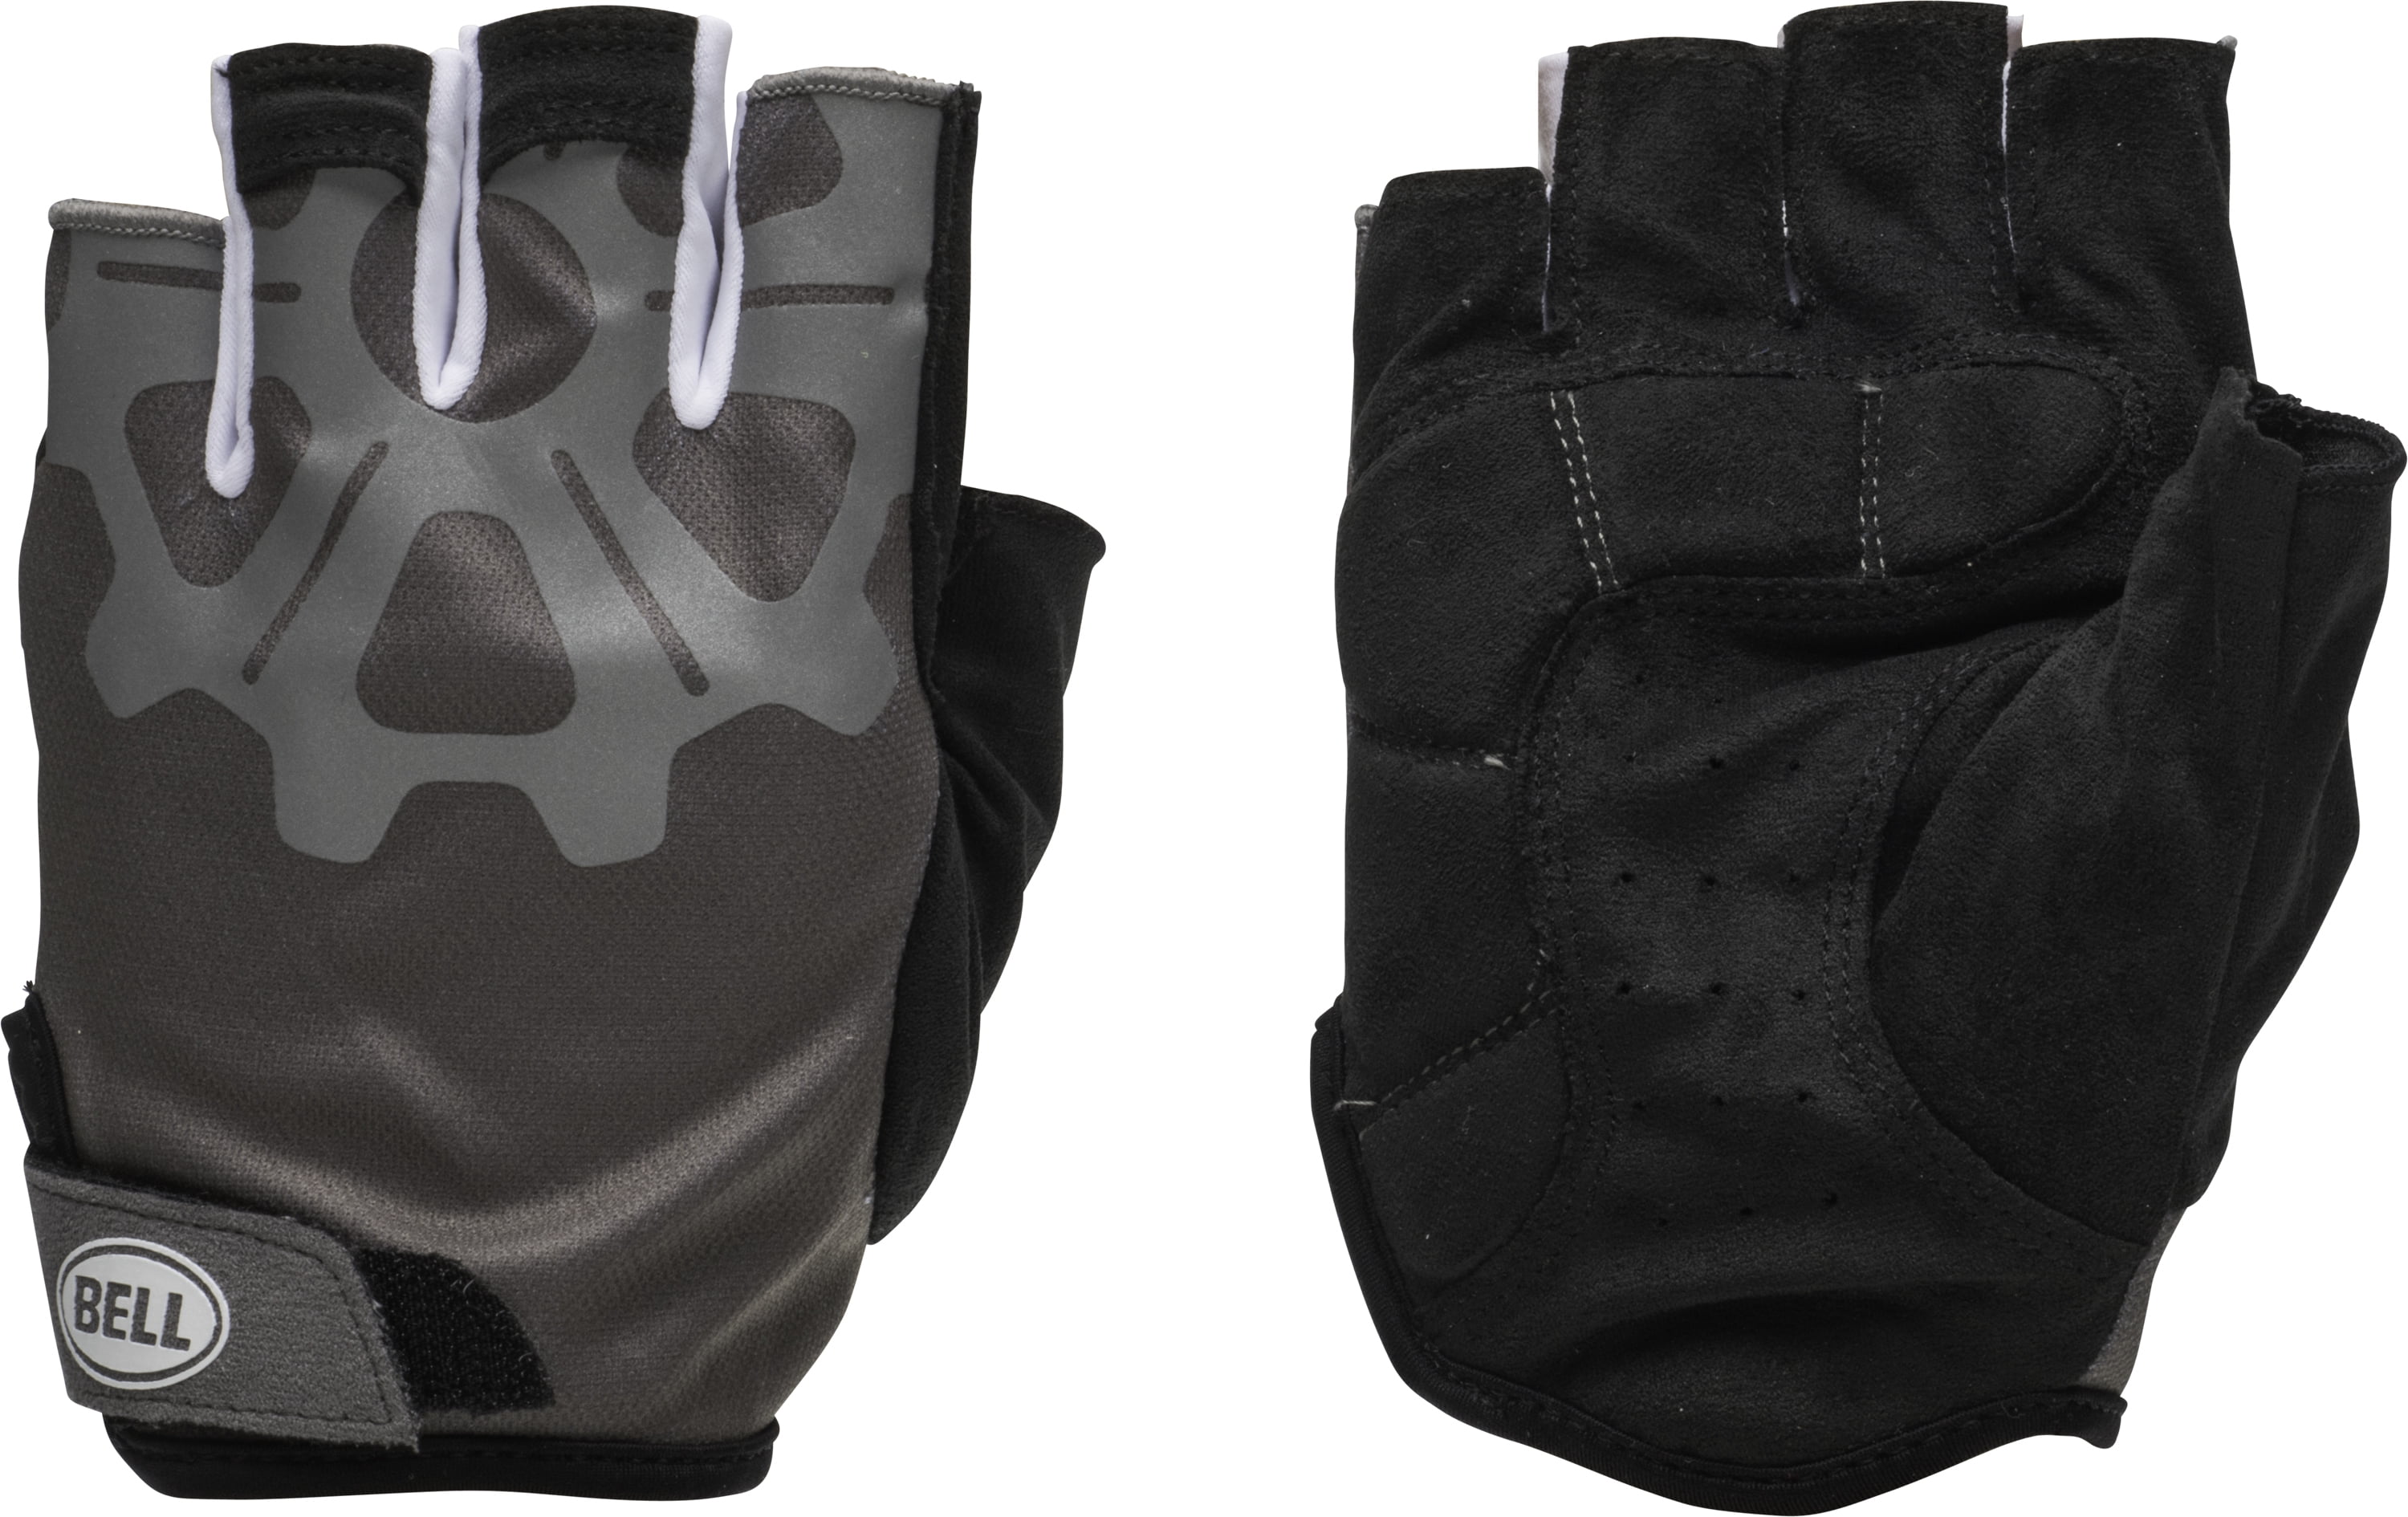 Bell Sports Scooter Black/Gray Fingerless Armor Gloves Size L/XL New in Package 